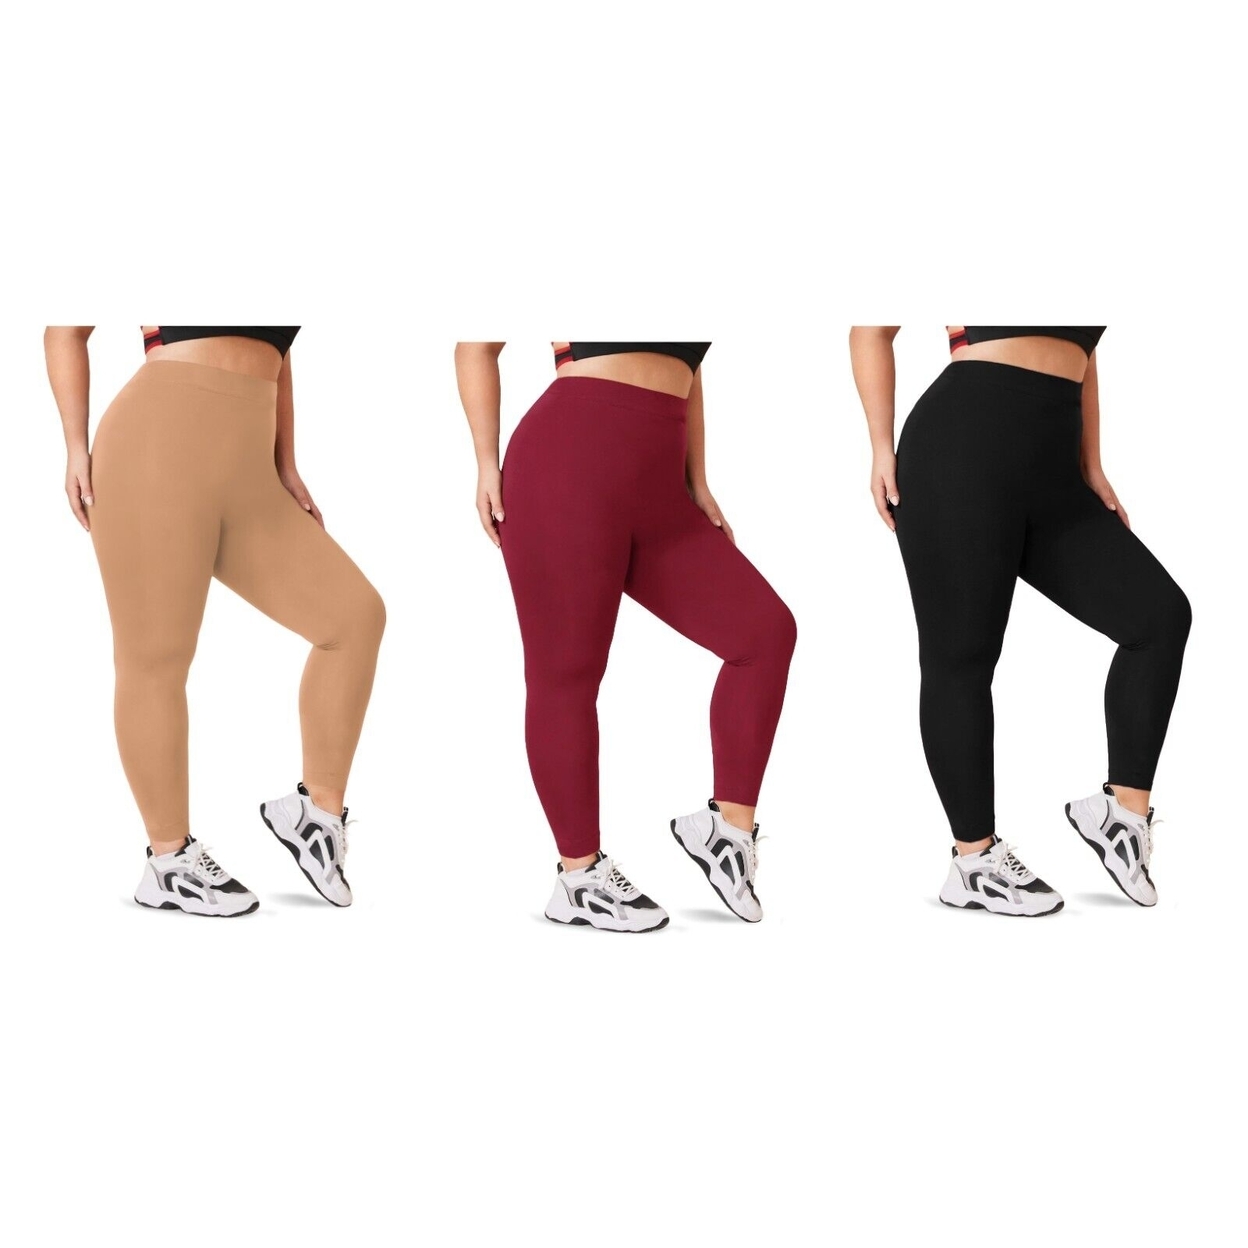 Multi-Pack: Women's Casual Ultra-Soft Smooth High Waisted Athletic Active Yoga Leggings Plus Size Available - 3-pack, 1x